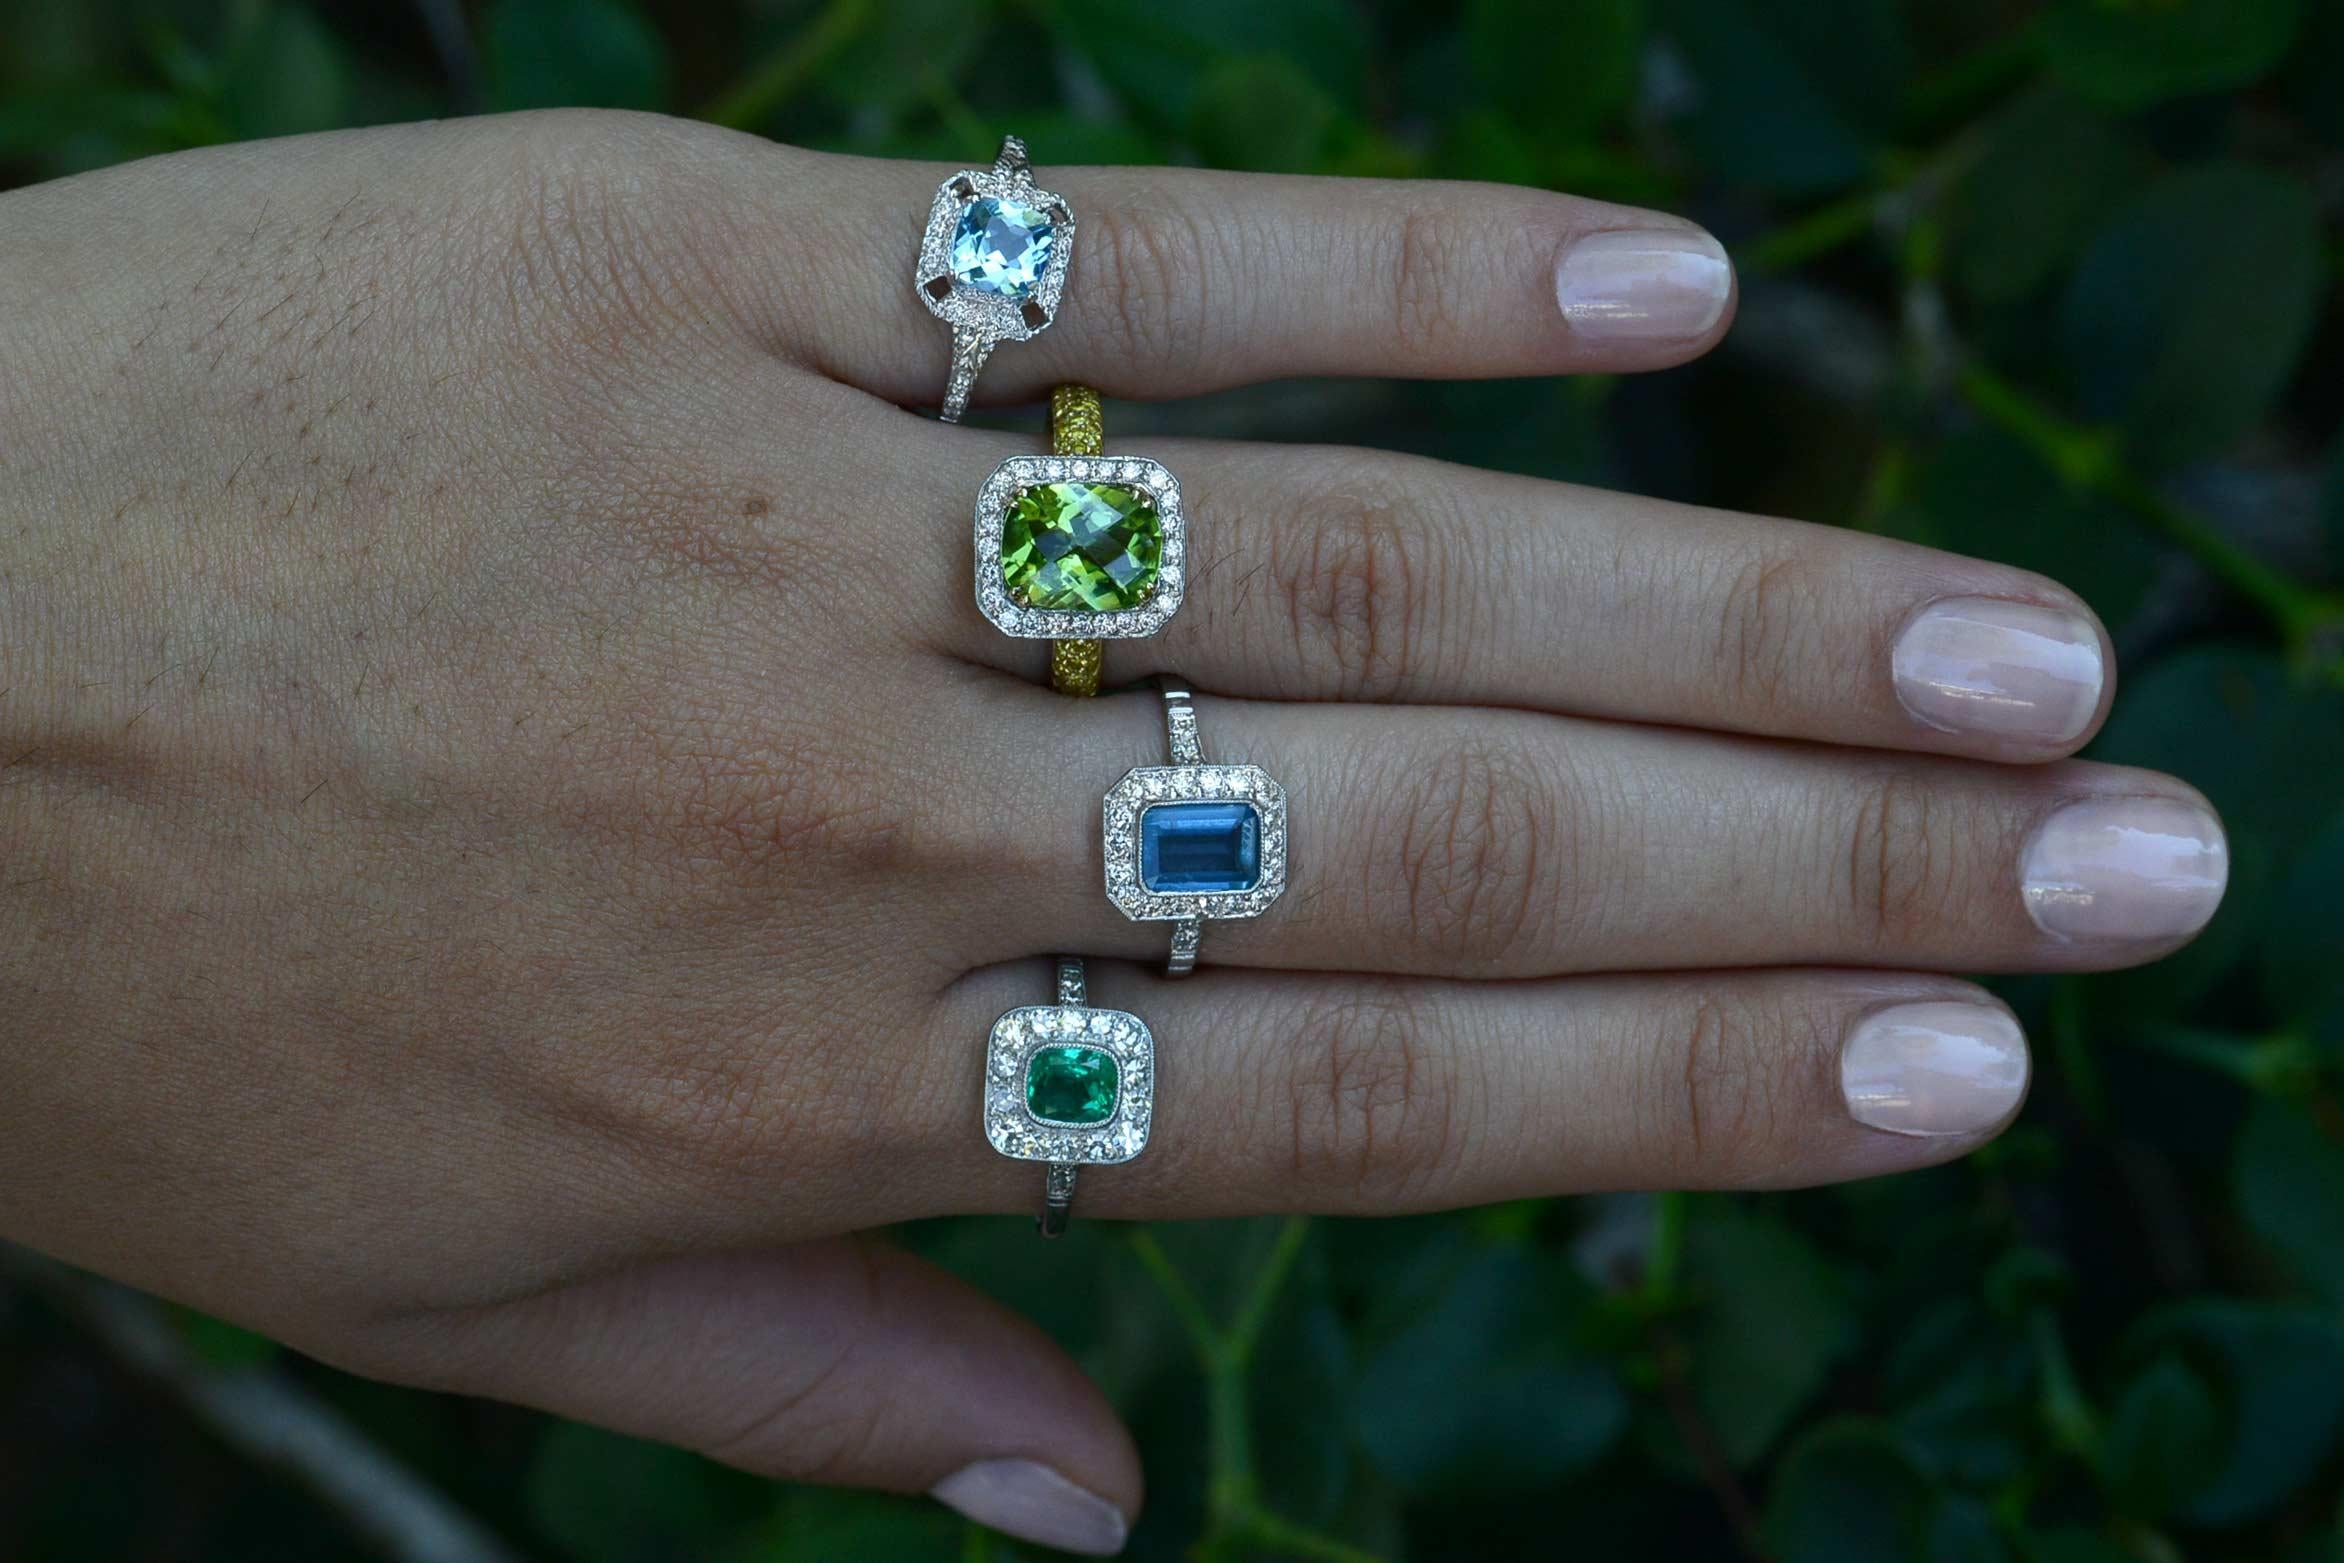 Glowing with a fire from within, the verdant green peridot sits regally, surrounded by a diamond halo. Finely fabricated of 18k gold and platinum in an Etruscan revival style, you will love how this vintage heirloom is supported by a two-tone under